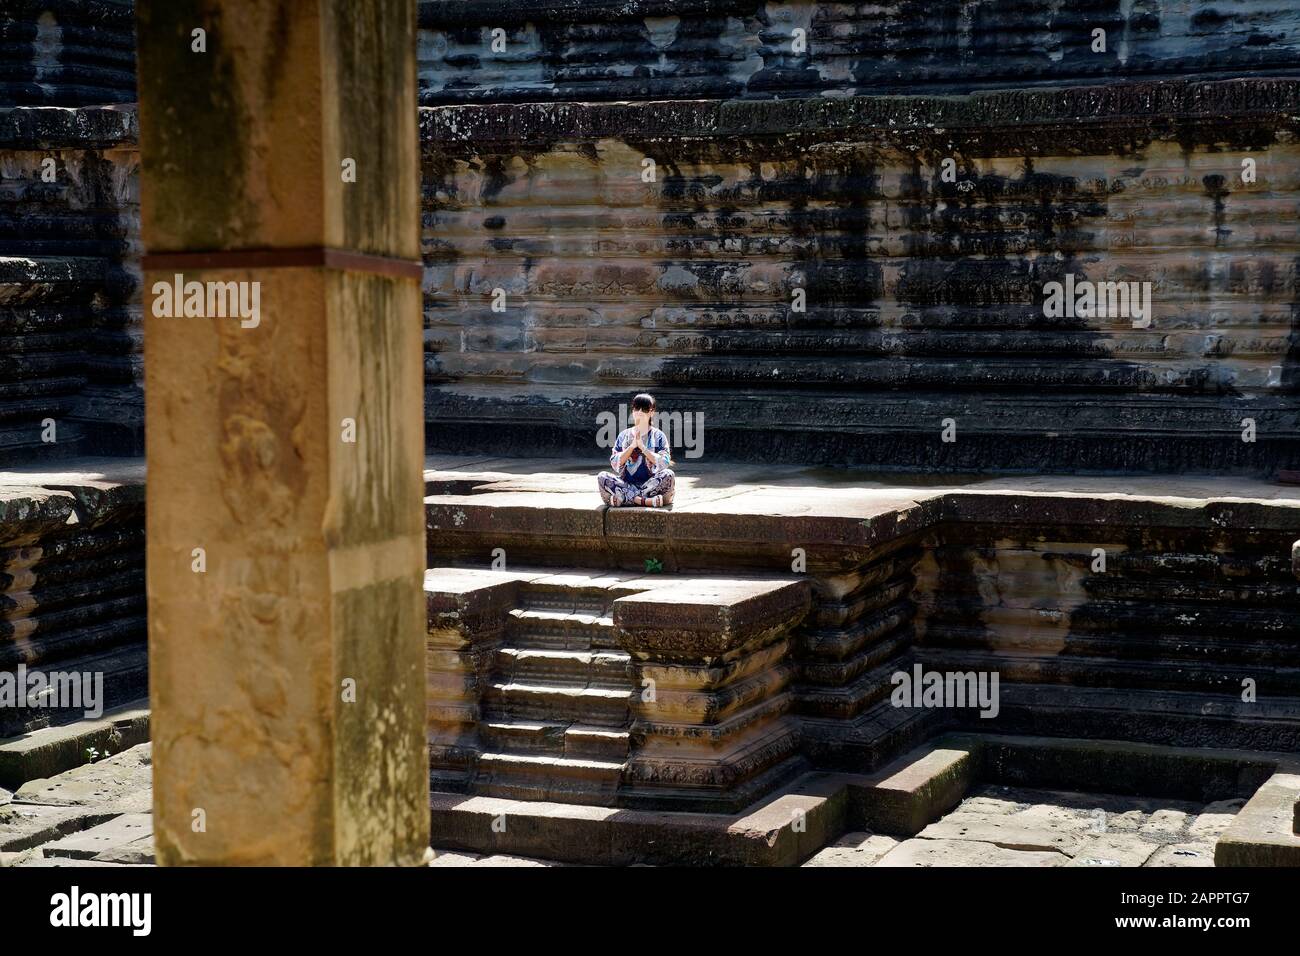 Cambodia, Angkor Wat, Siem Reap Province. The magnificent Khmer temple of Angkor Wat bathed in afternoon sunshine. Stock Photo